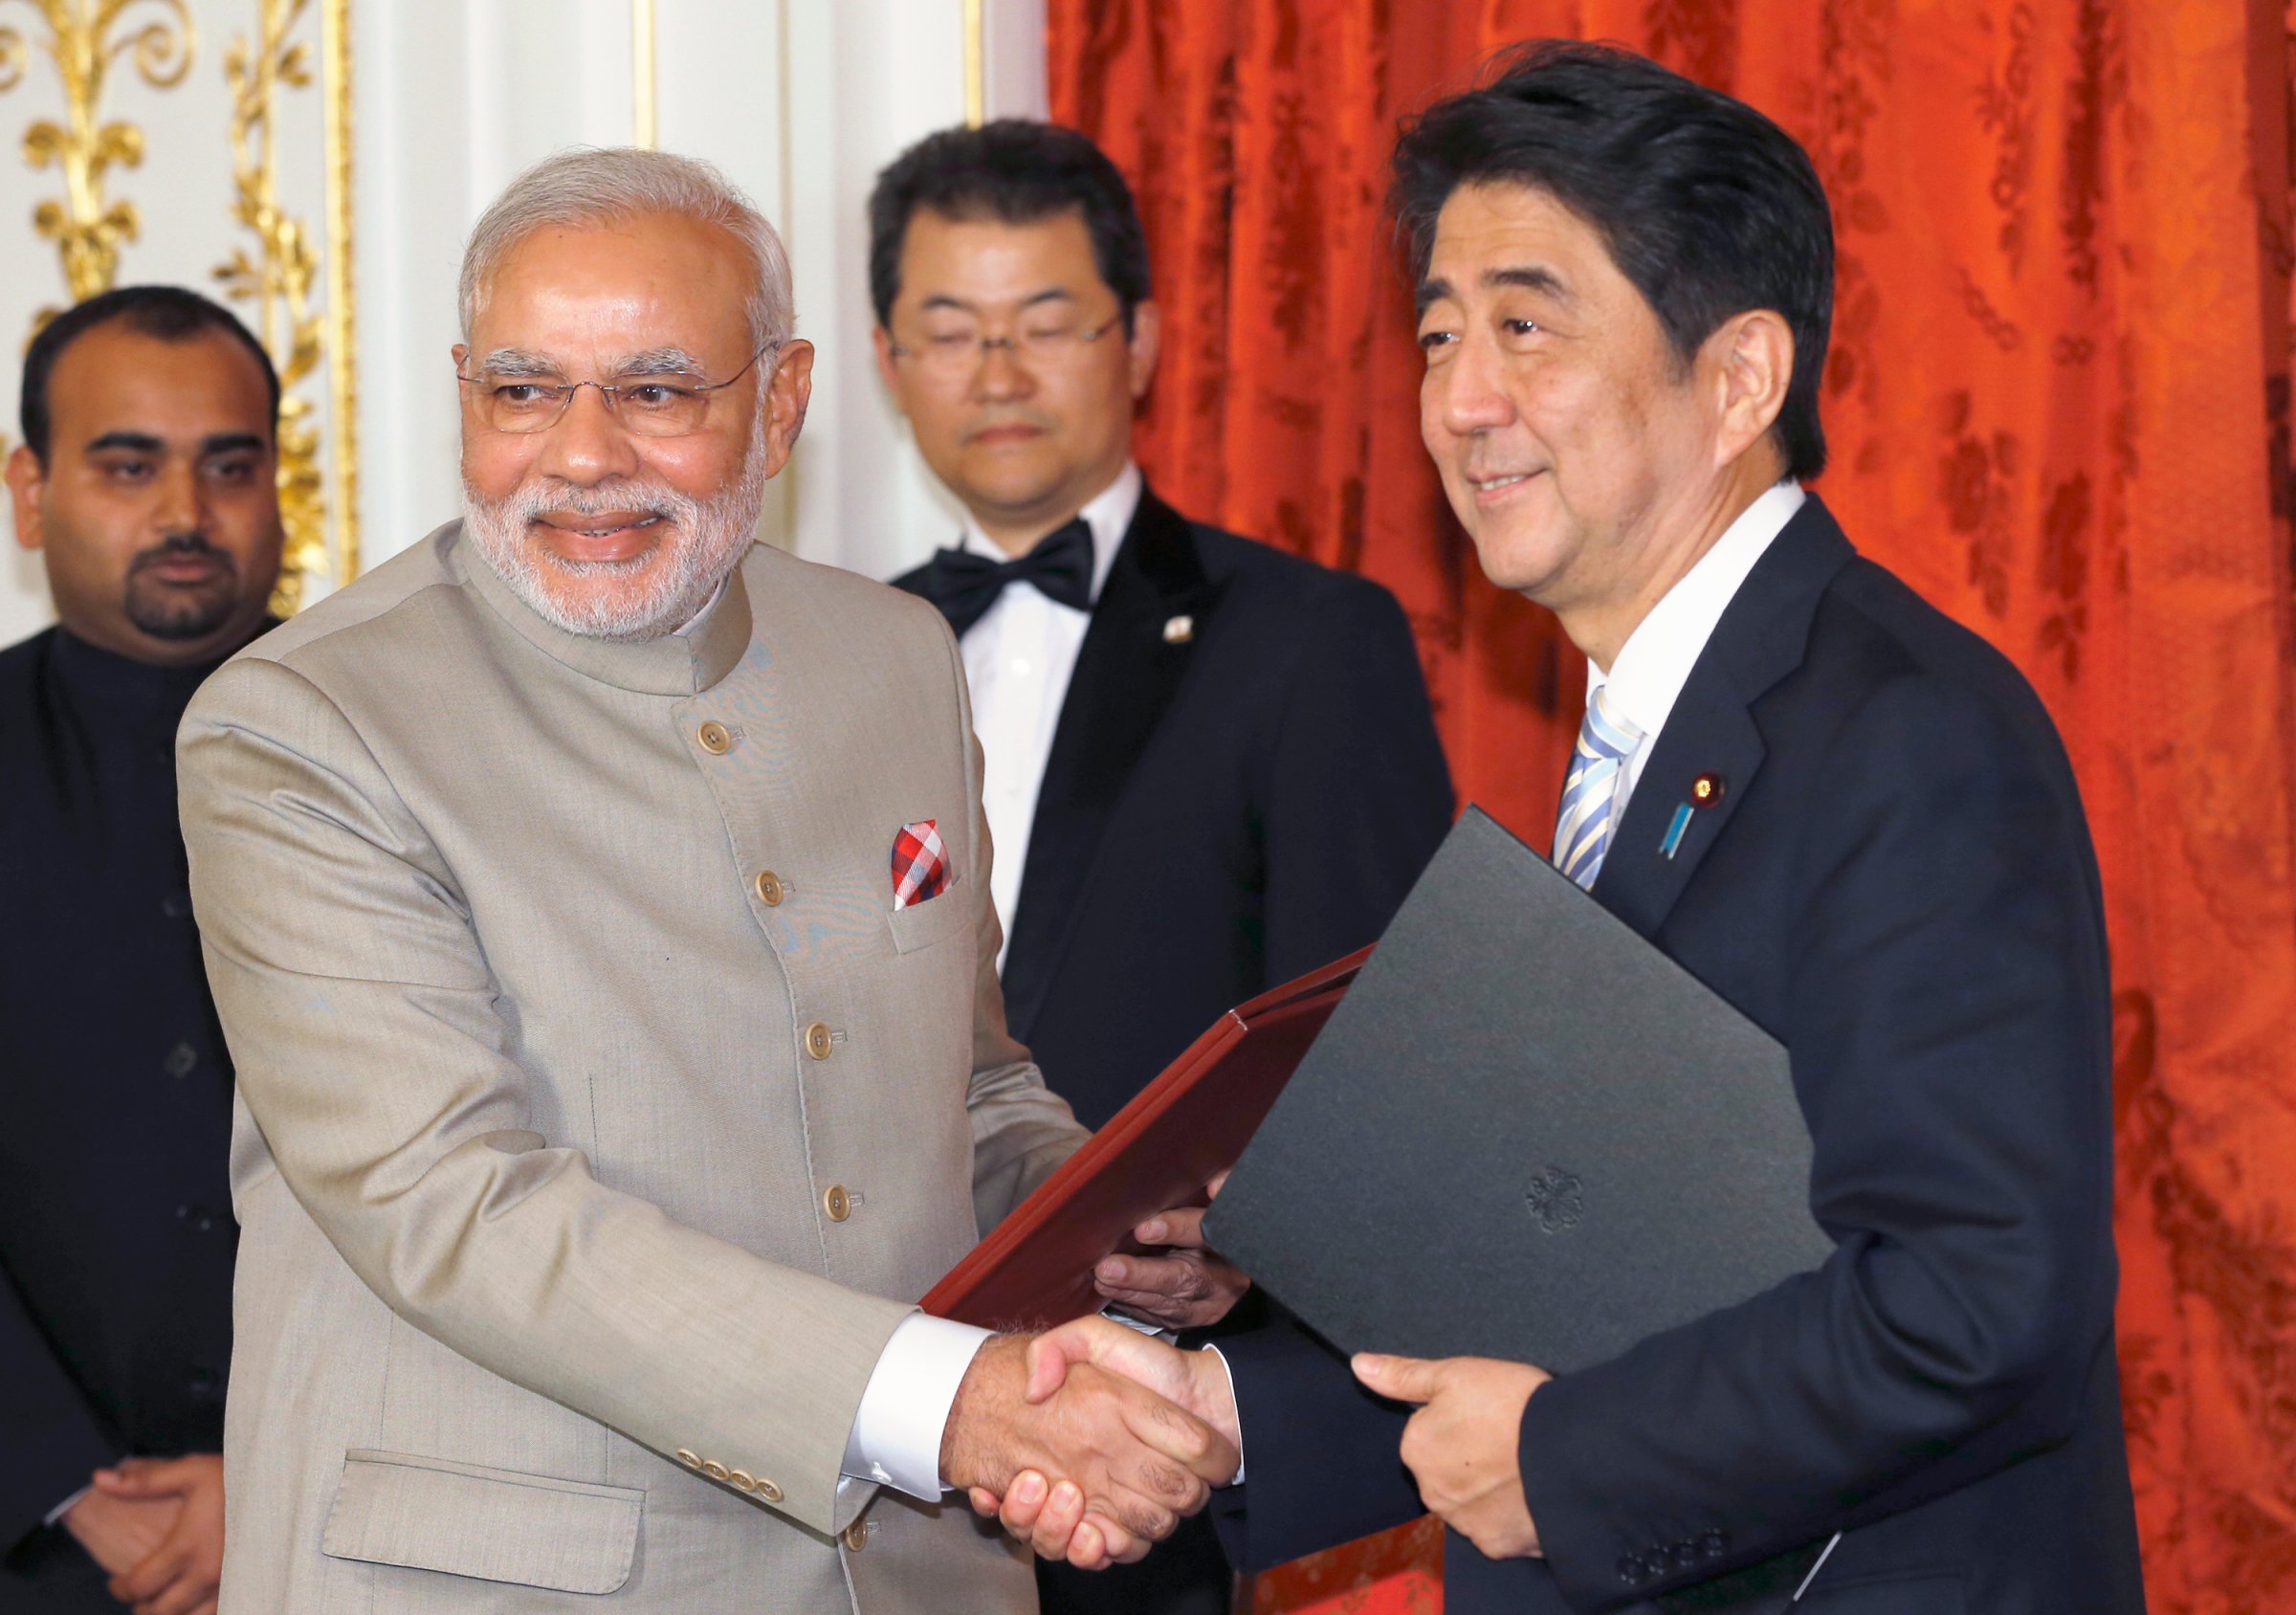 India's PM Modi shakes hands with Japan's PM Abe during a signing ceremony at the state guest house in Tokyo